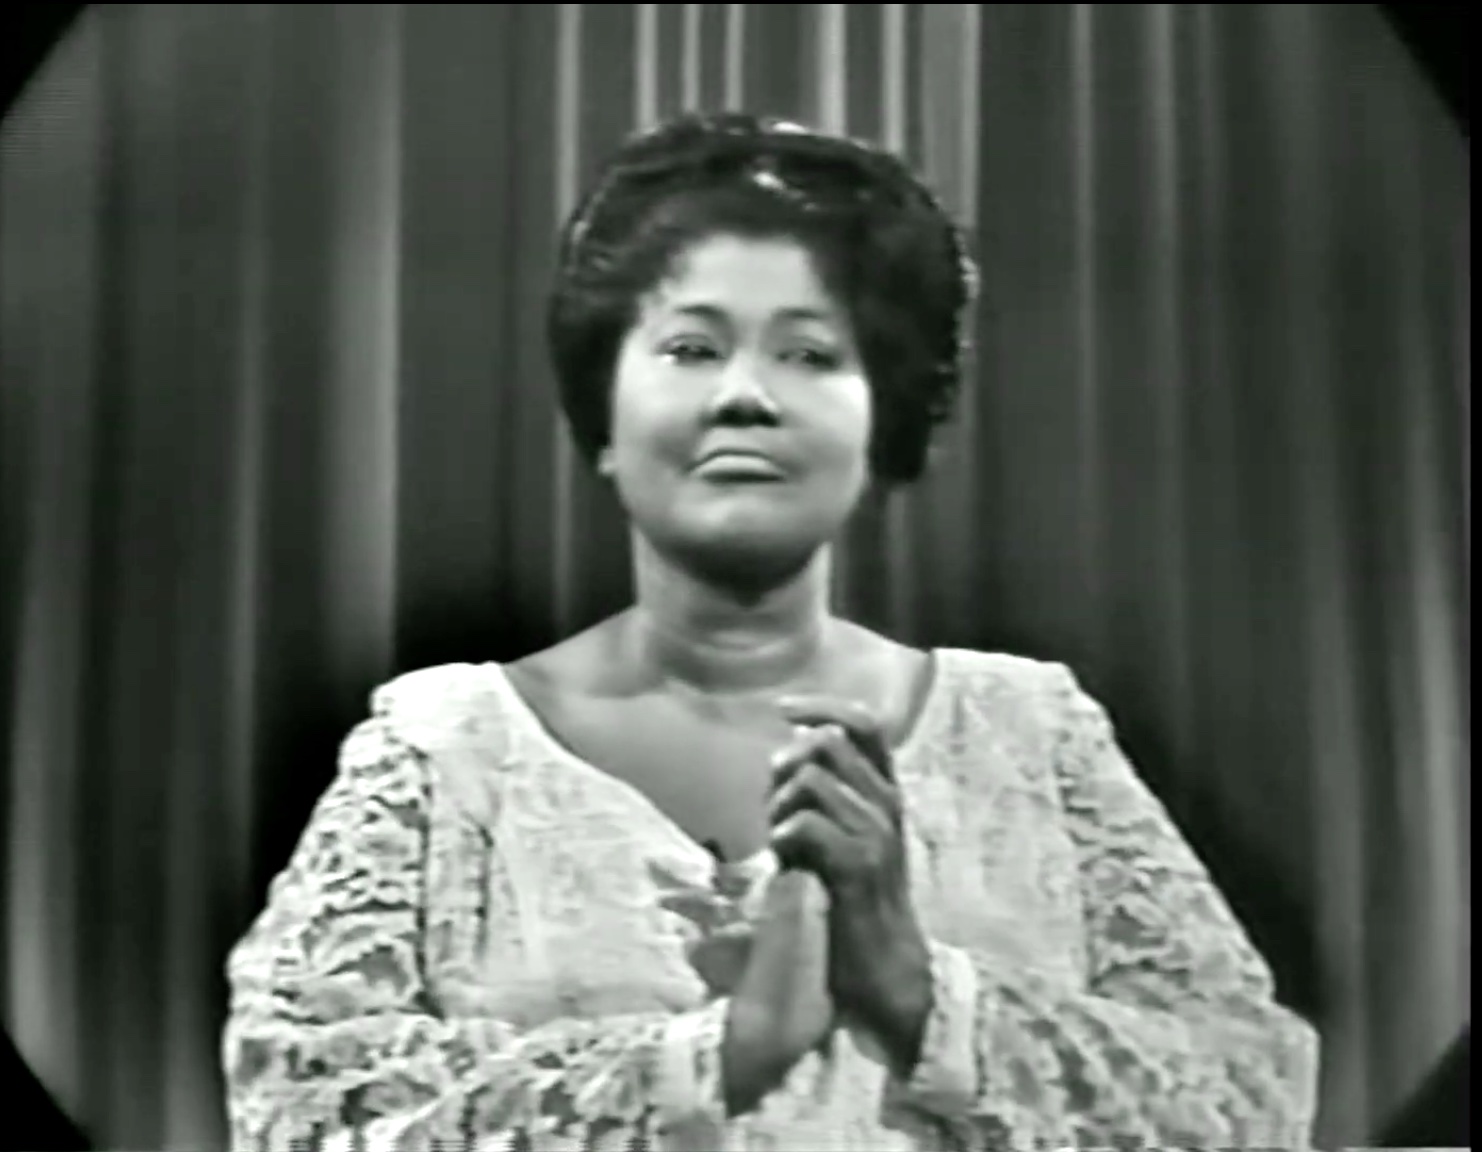 Hymn lyrics to "I Asked the Lord", as performed by Mahalia Jackson on The Red Skelton Hour - possibly derived from the John Newton hymn